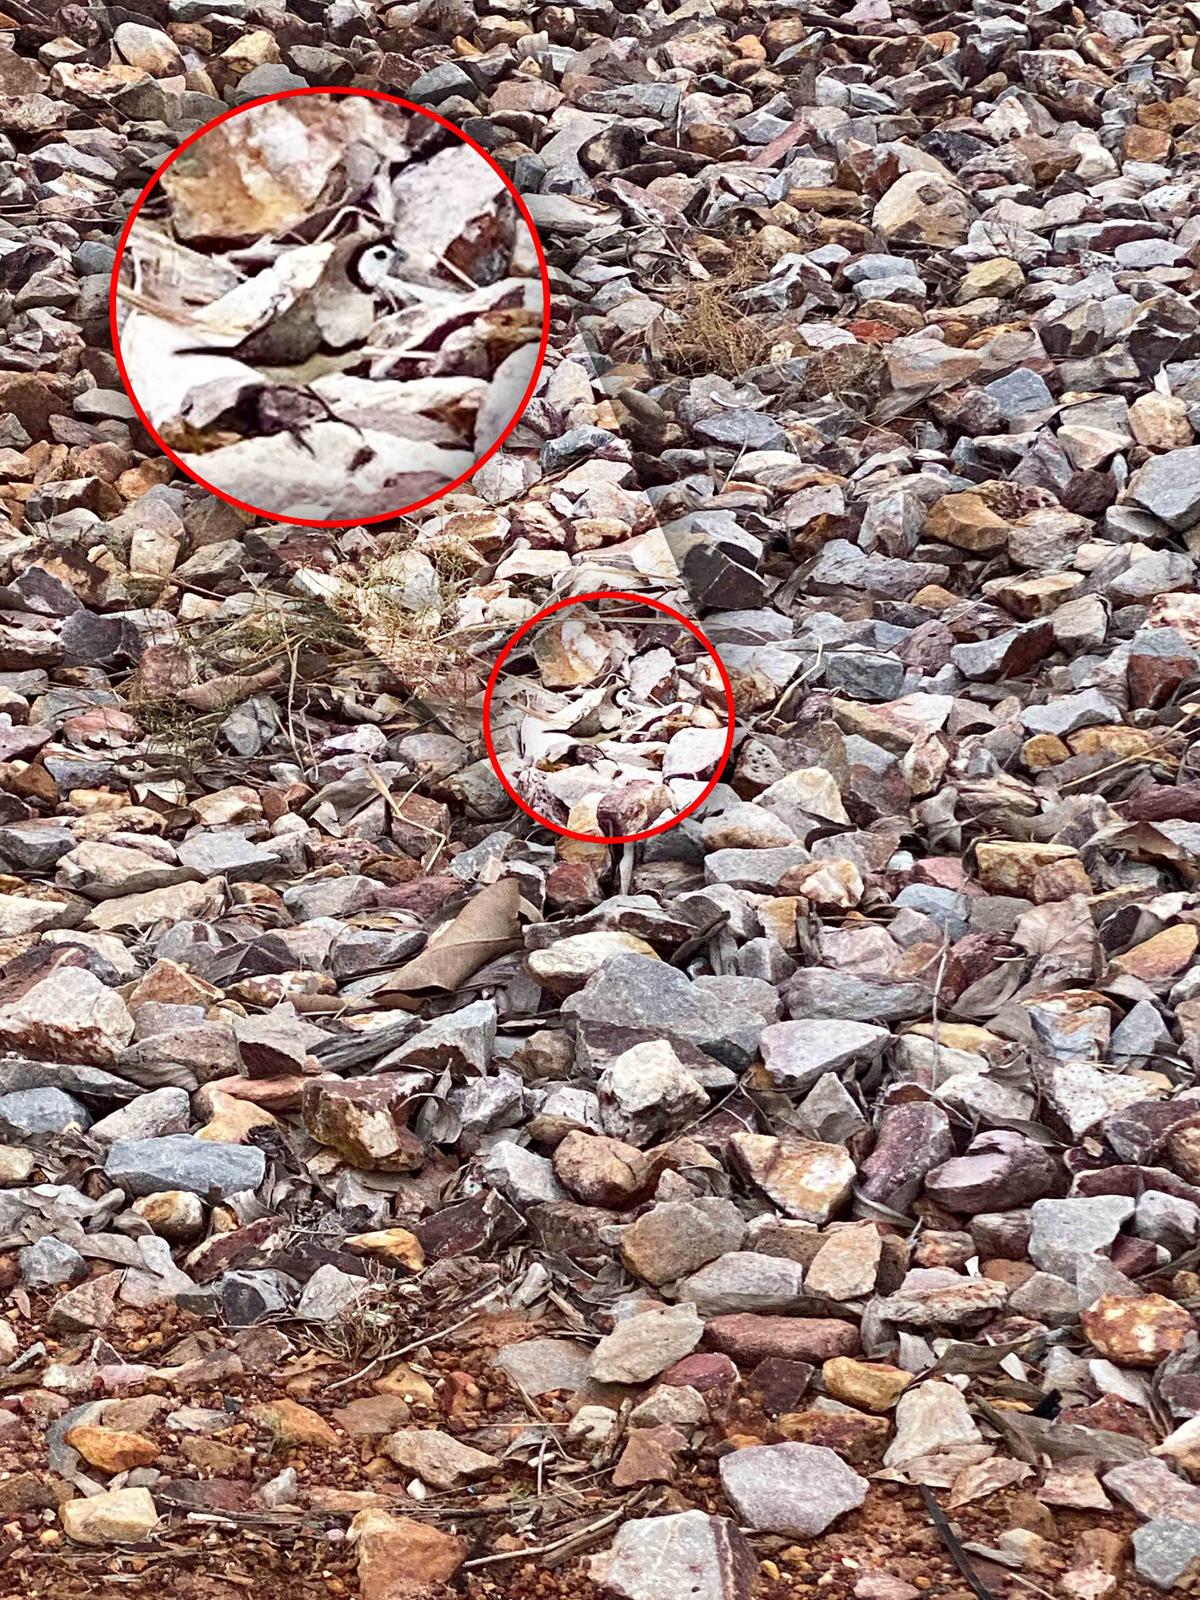 The finch hiding among the rocks is revealed. (Courtesy of Caters News)